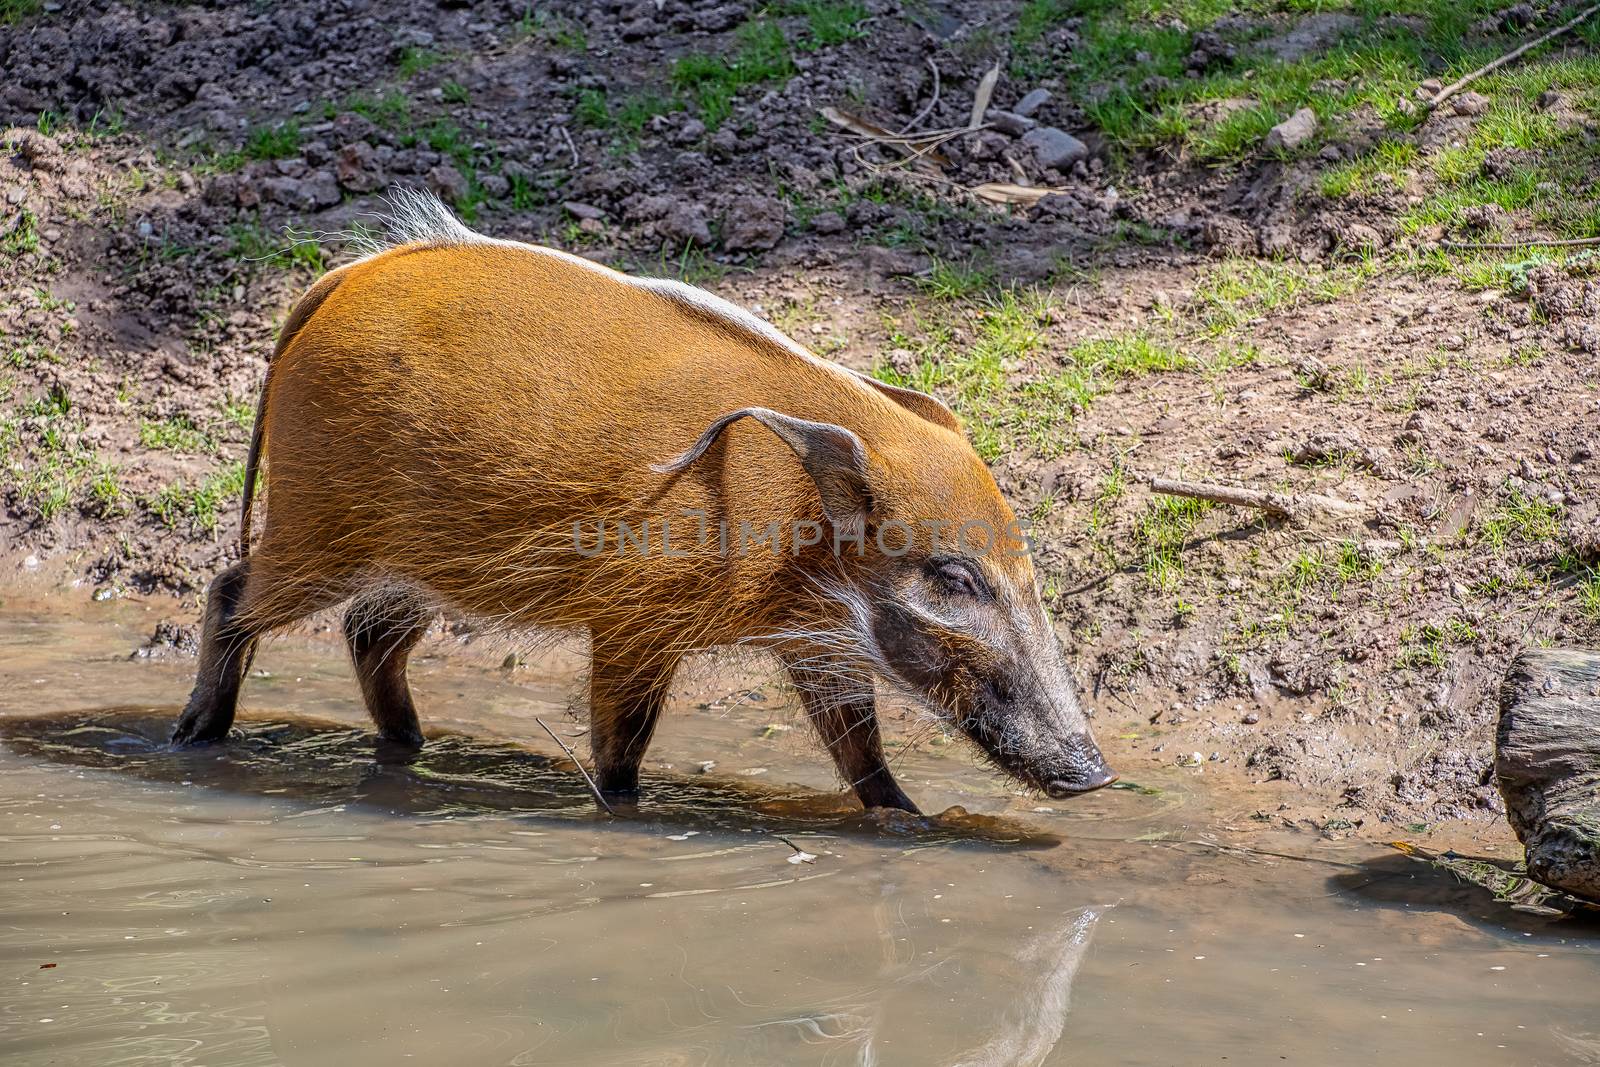 Red River Hog walking along the edge of a river